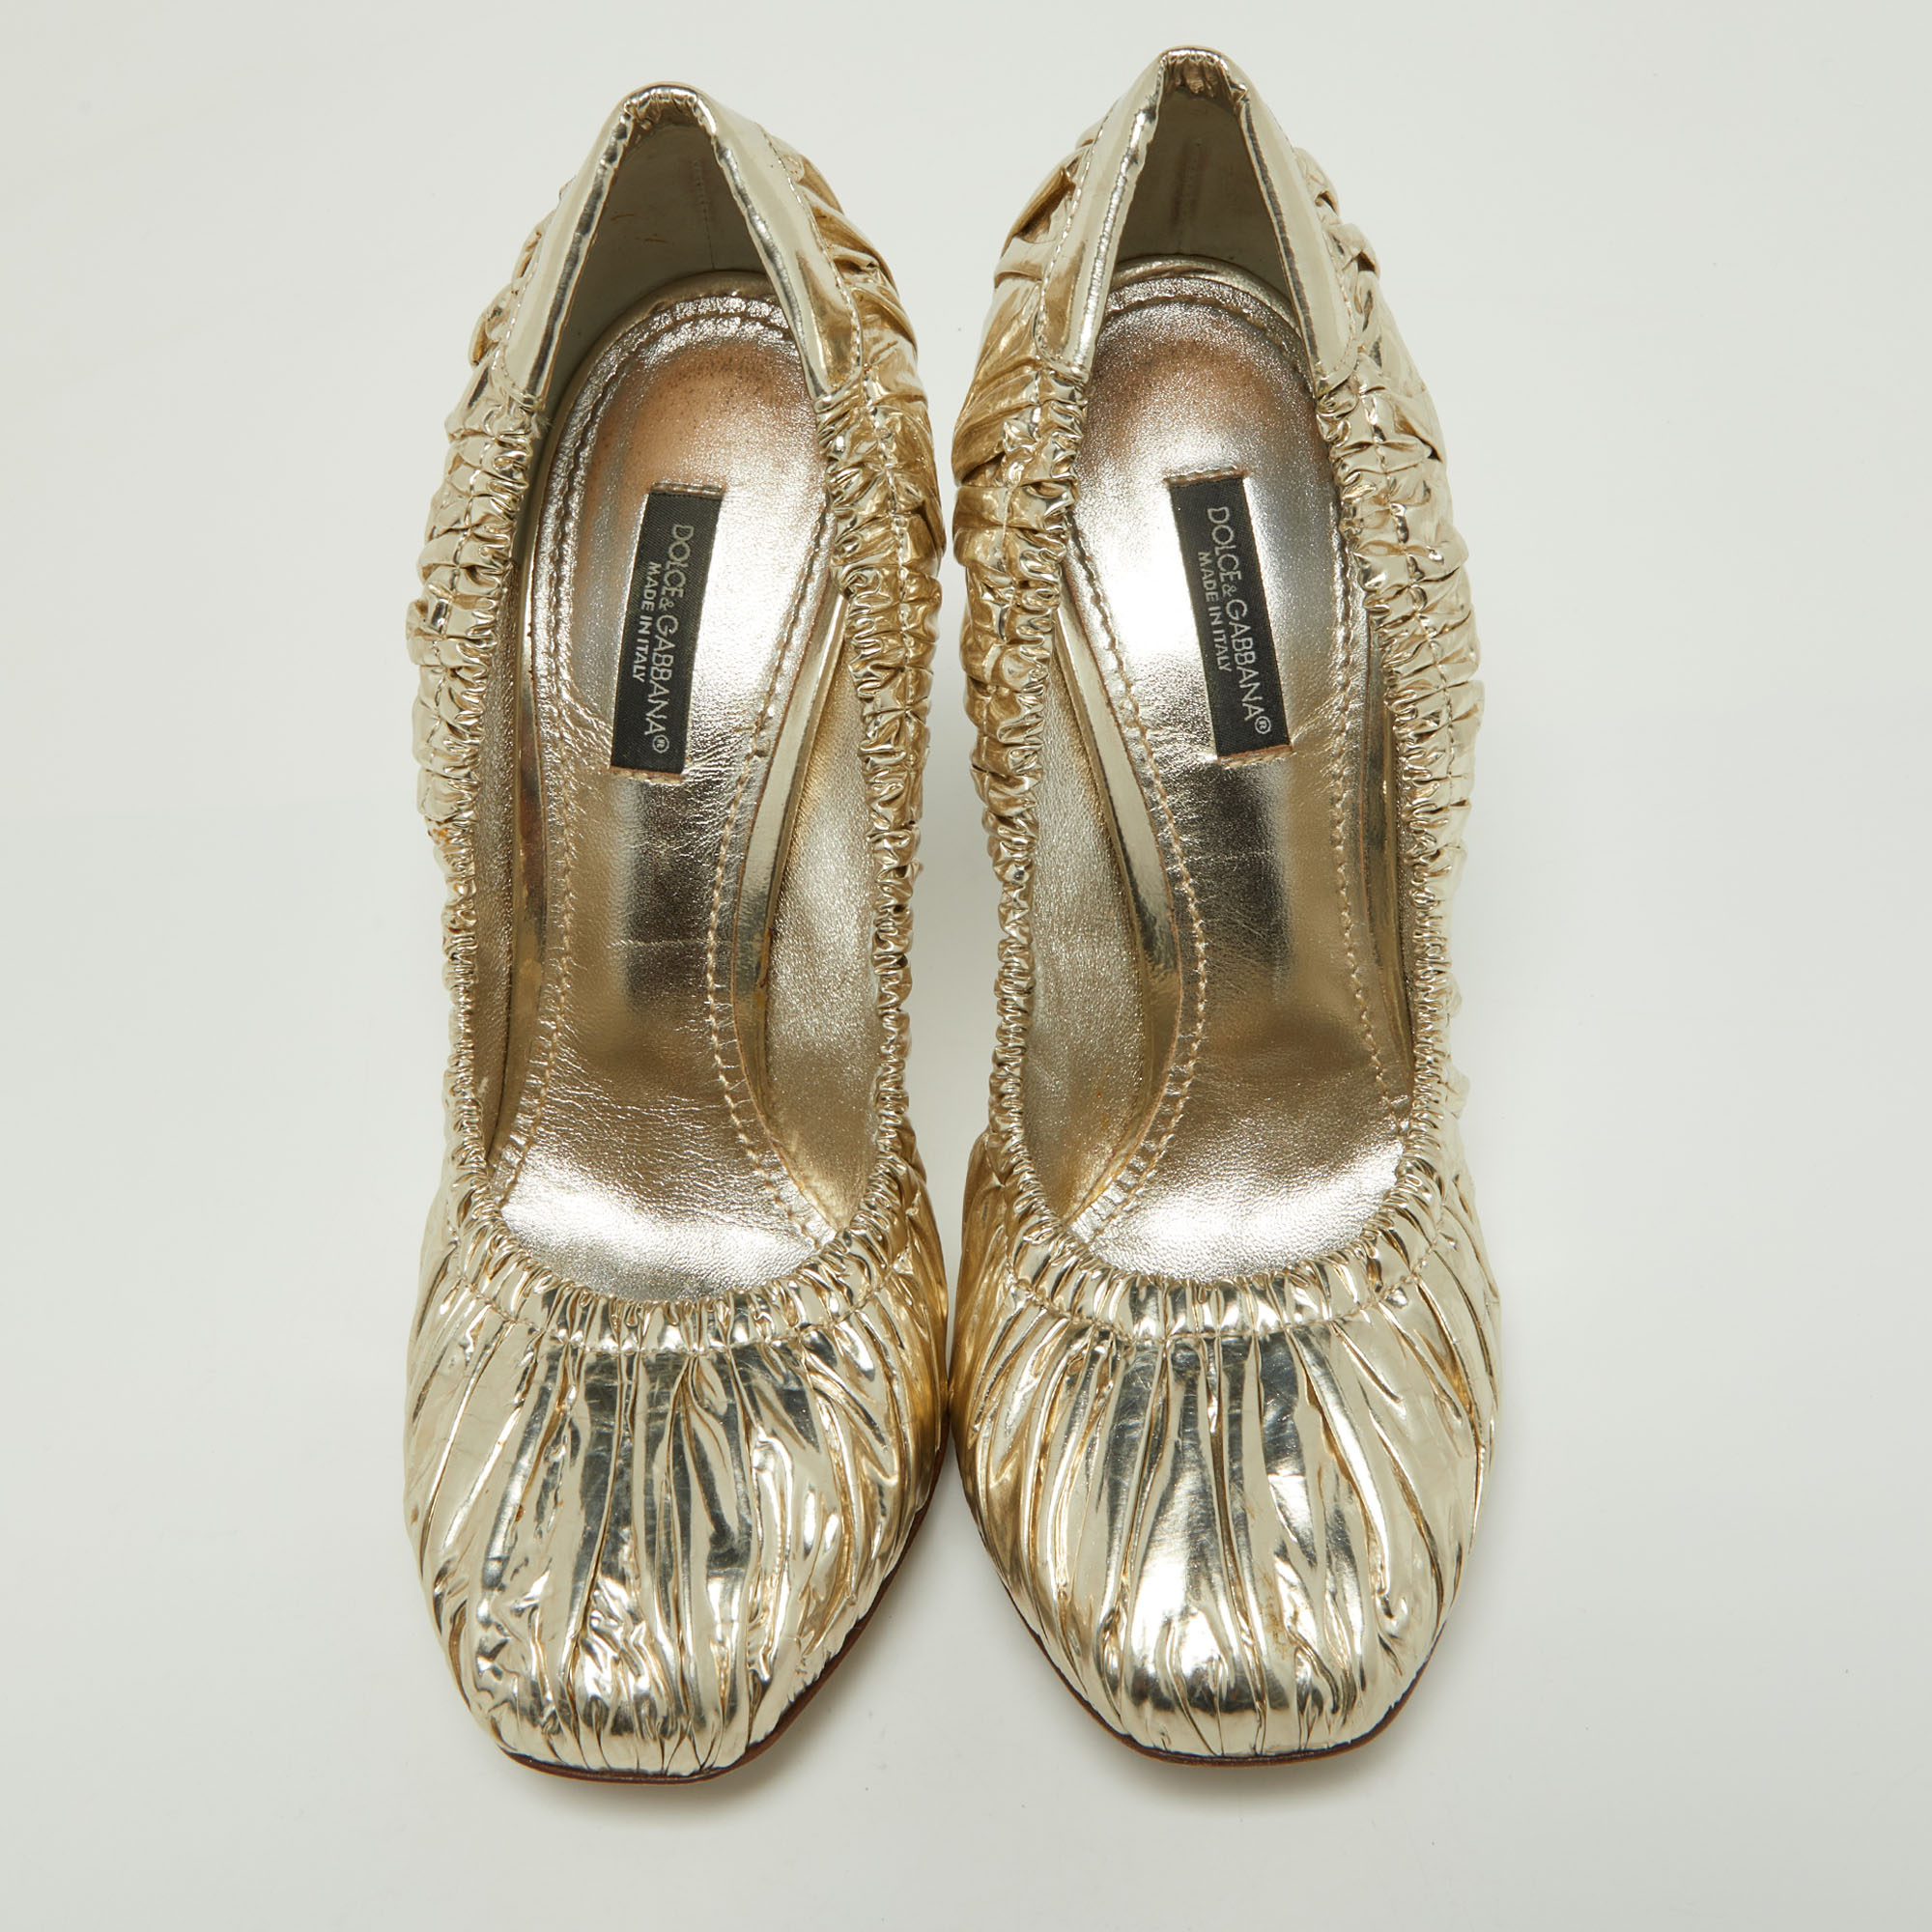 Dolce & Gabbana Gold Pleated Leather Pumps Size 37